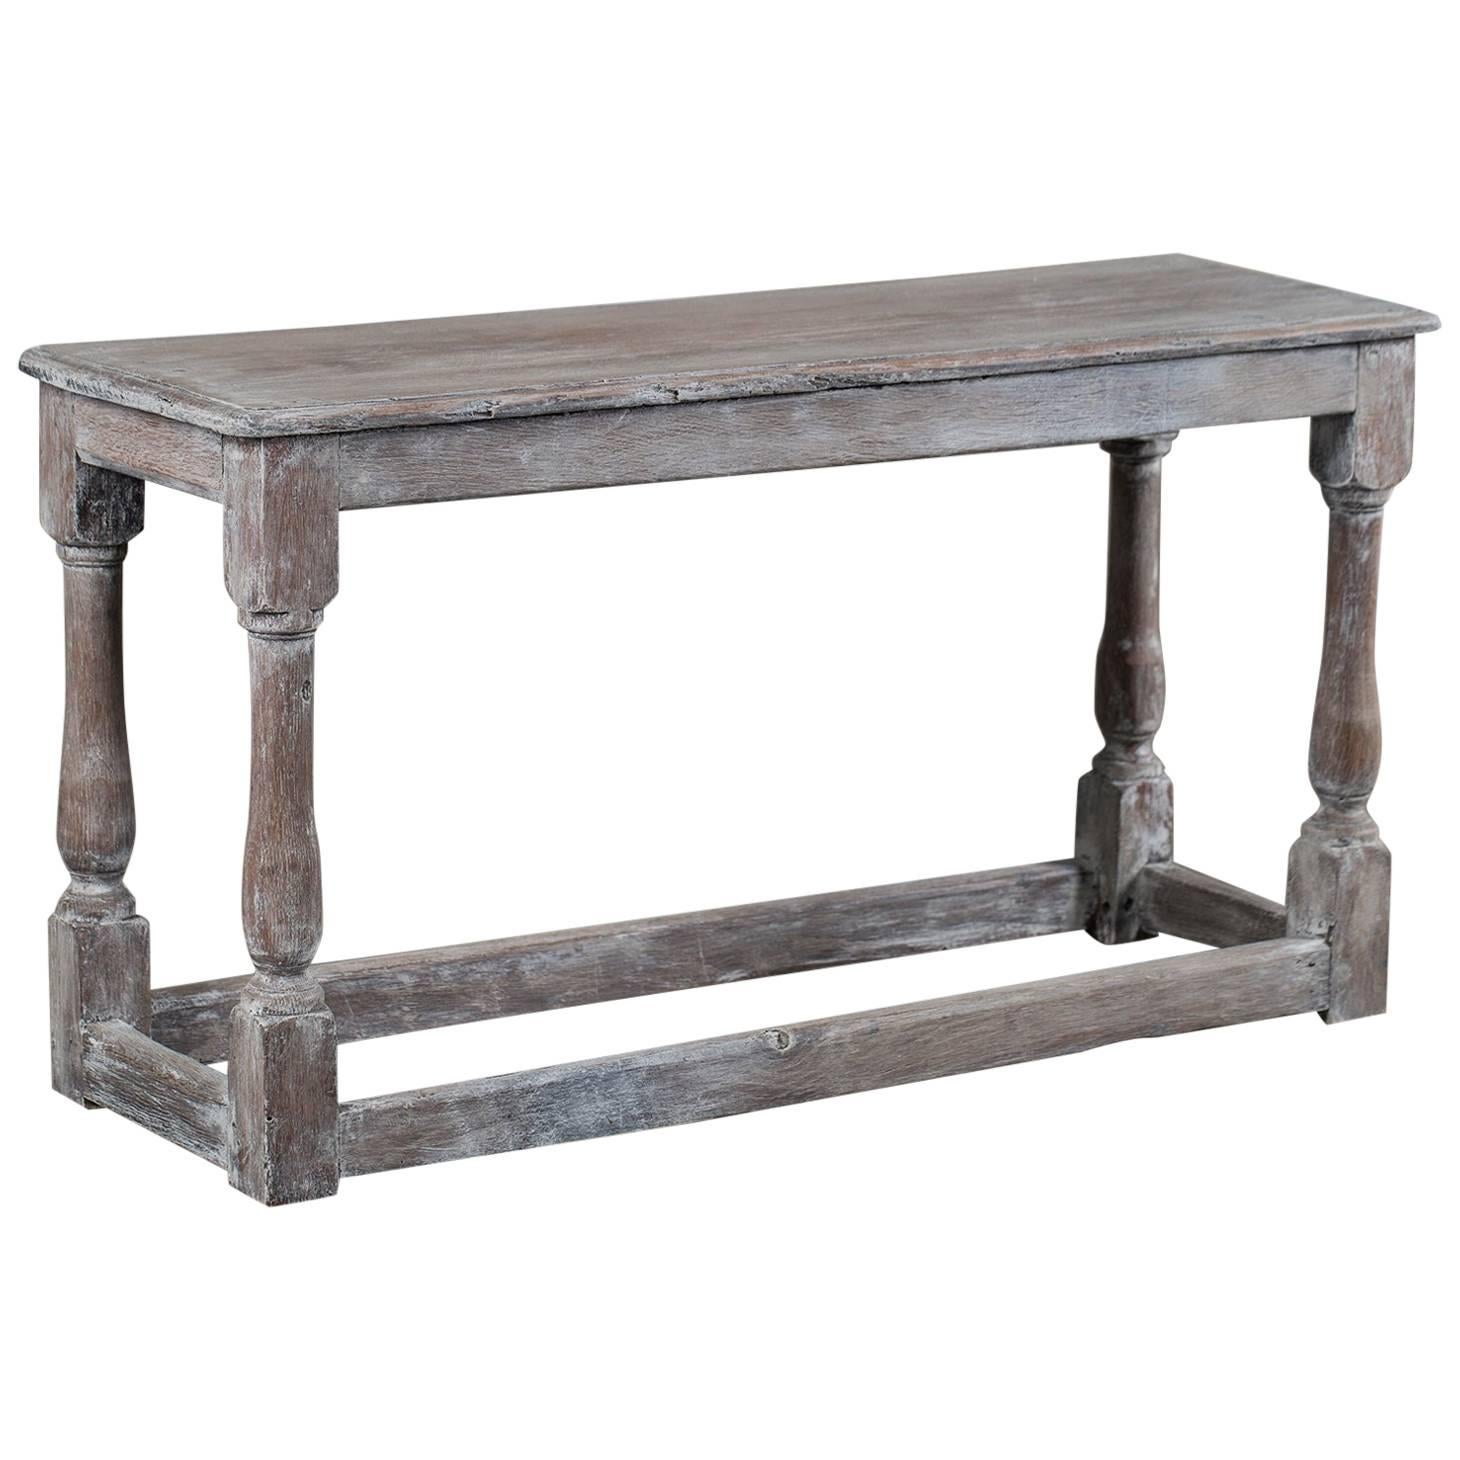 Antique English Limed Oak Joint Bench, circa 1890